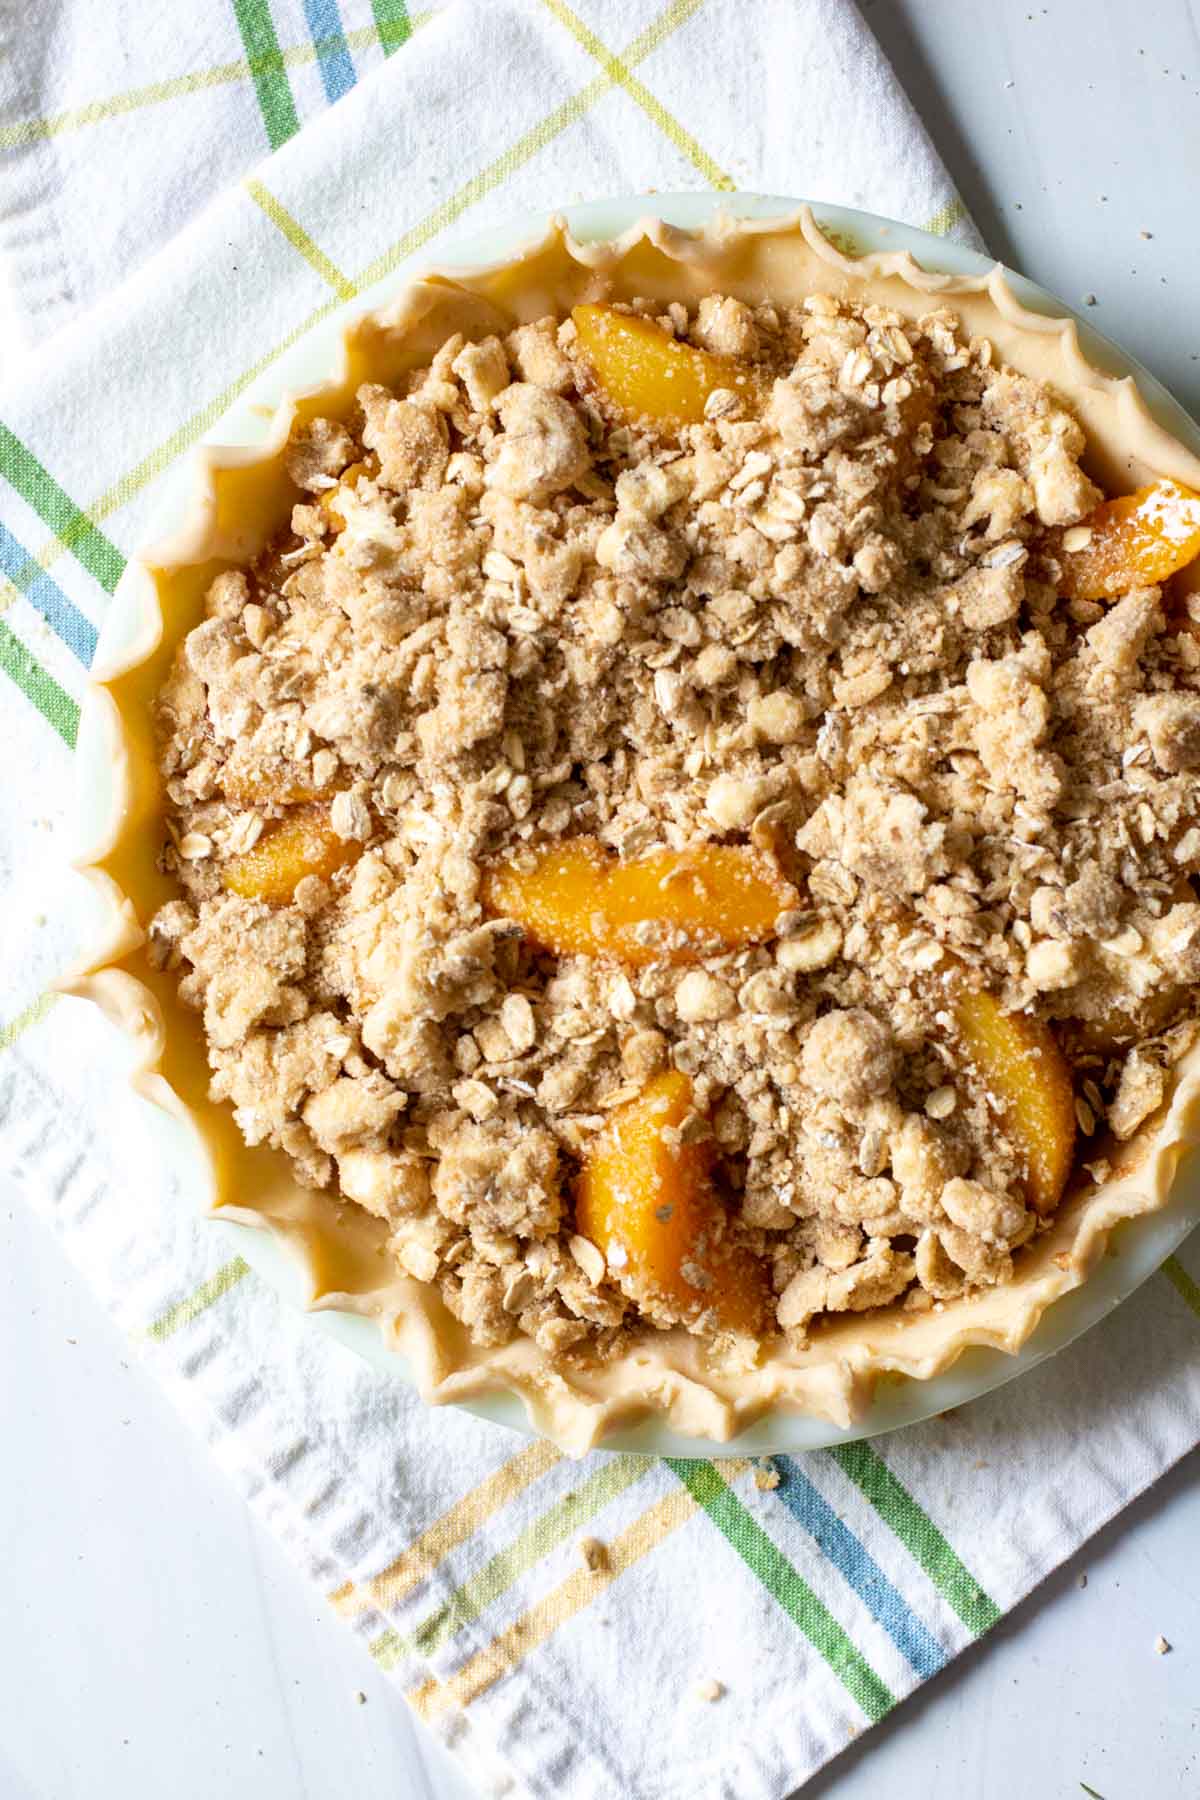 Streusel topping for peach pie made with canned peaches.